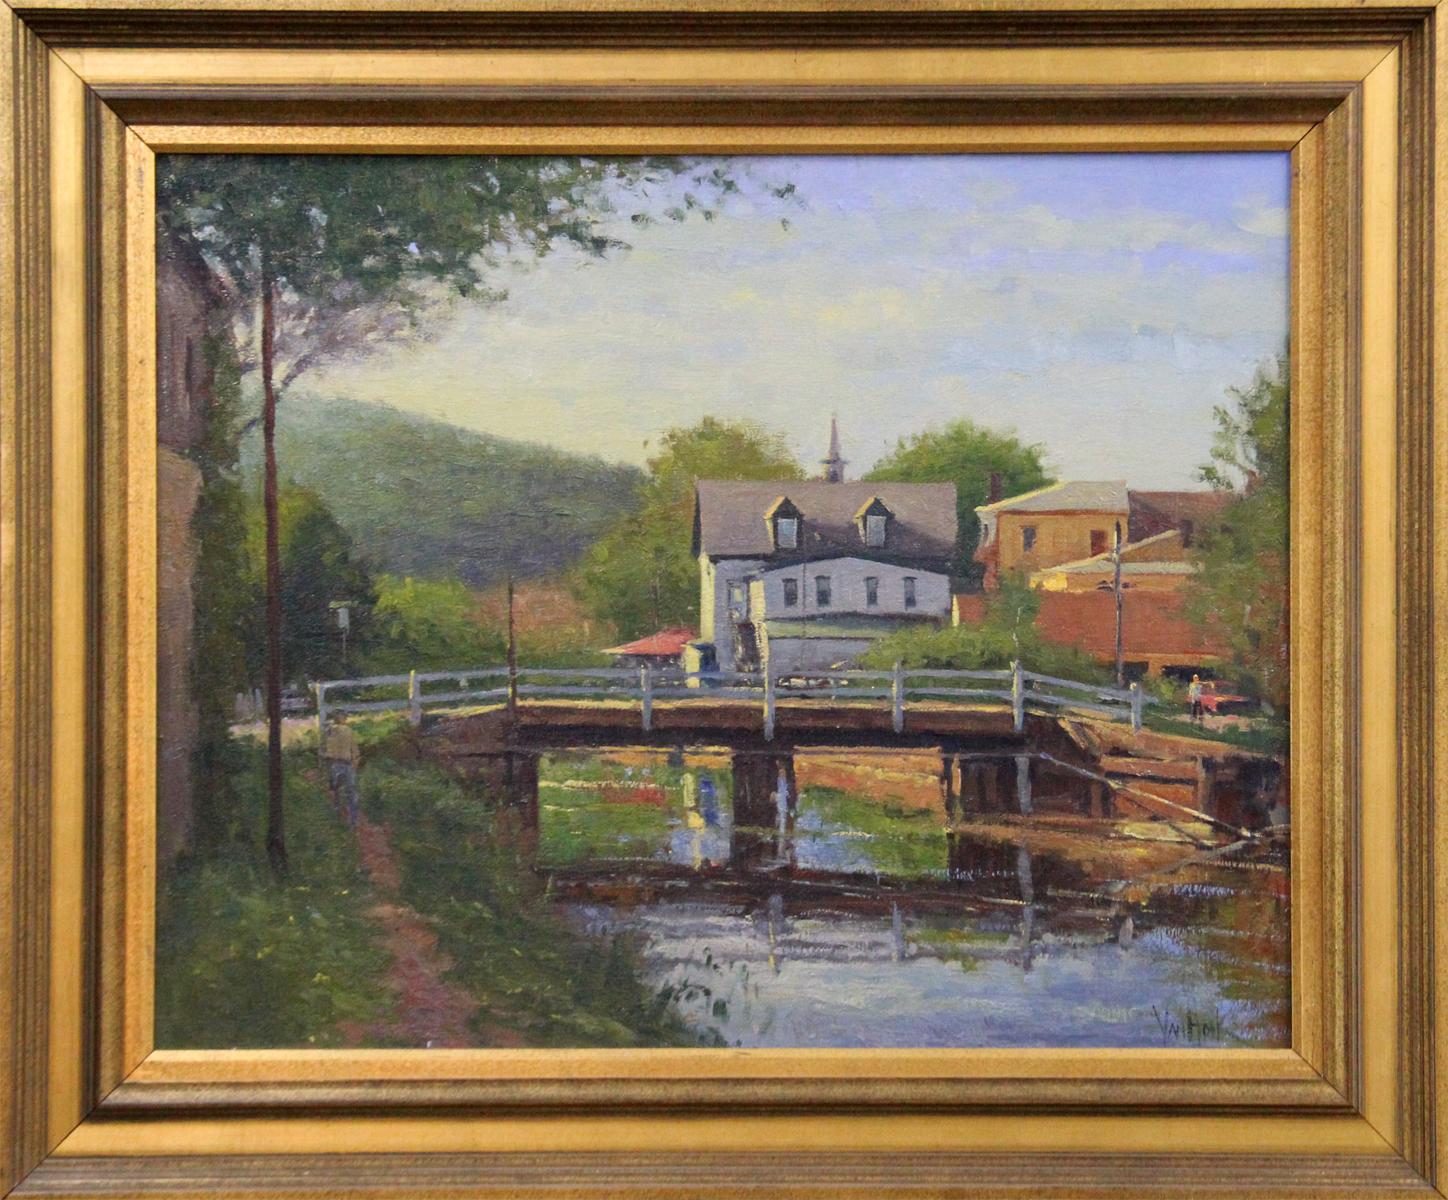 "Lambertville Morning" is a 22" x 28" oil on canvas landscape and townscape of the canal and homes in Lambertville, New Jersey. The painting is signed "Van Hook" in the lower right and comes from a private collection. Additional shipping options and